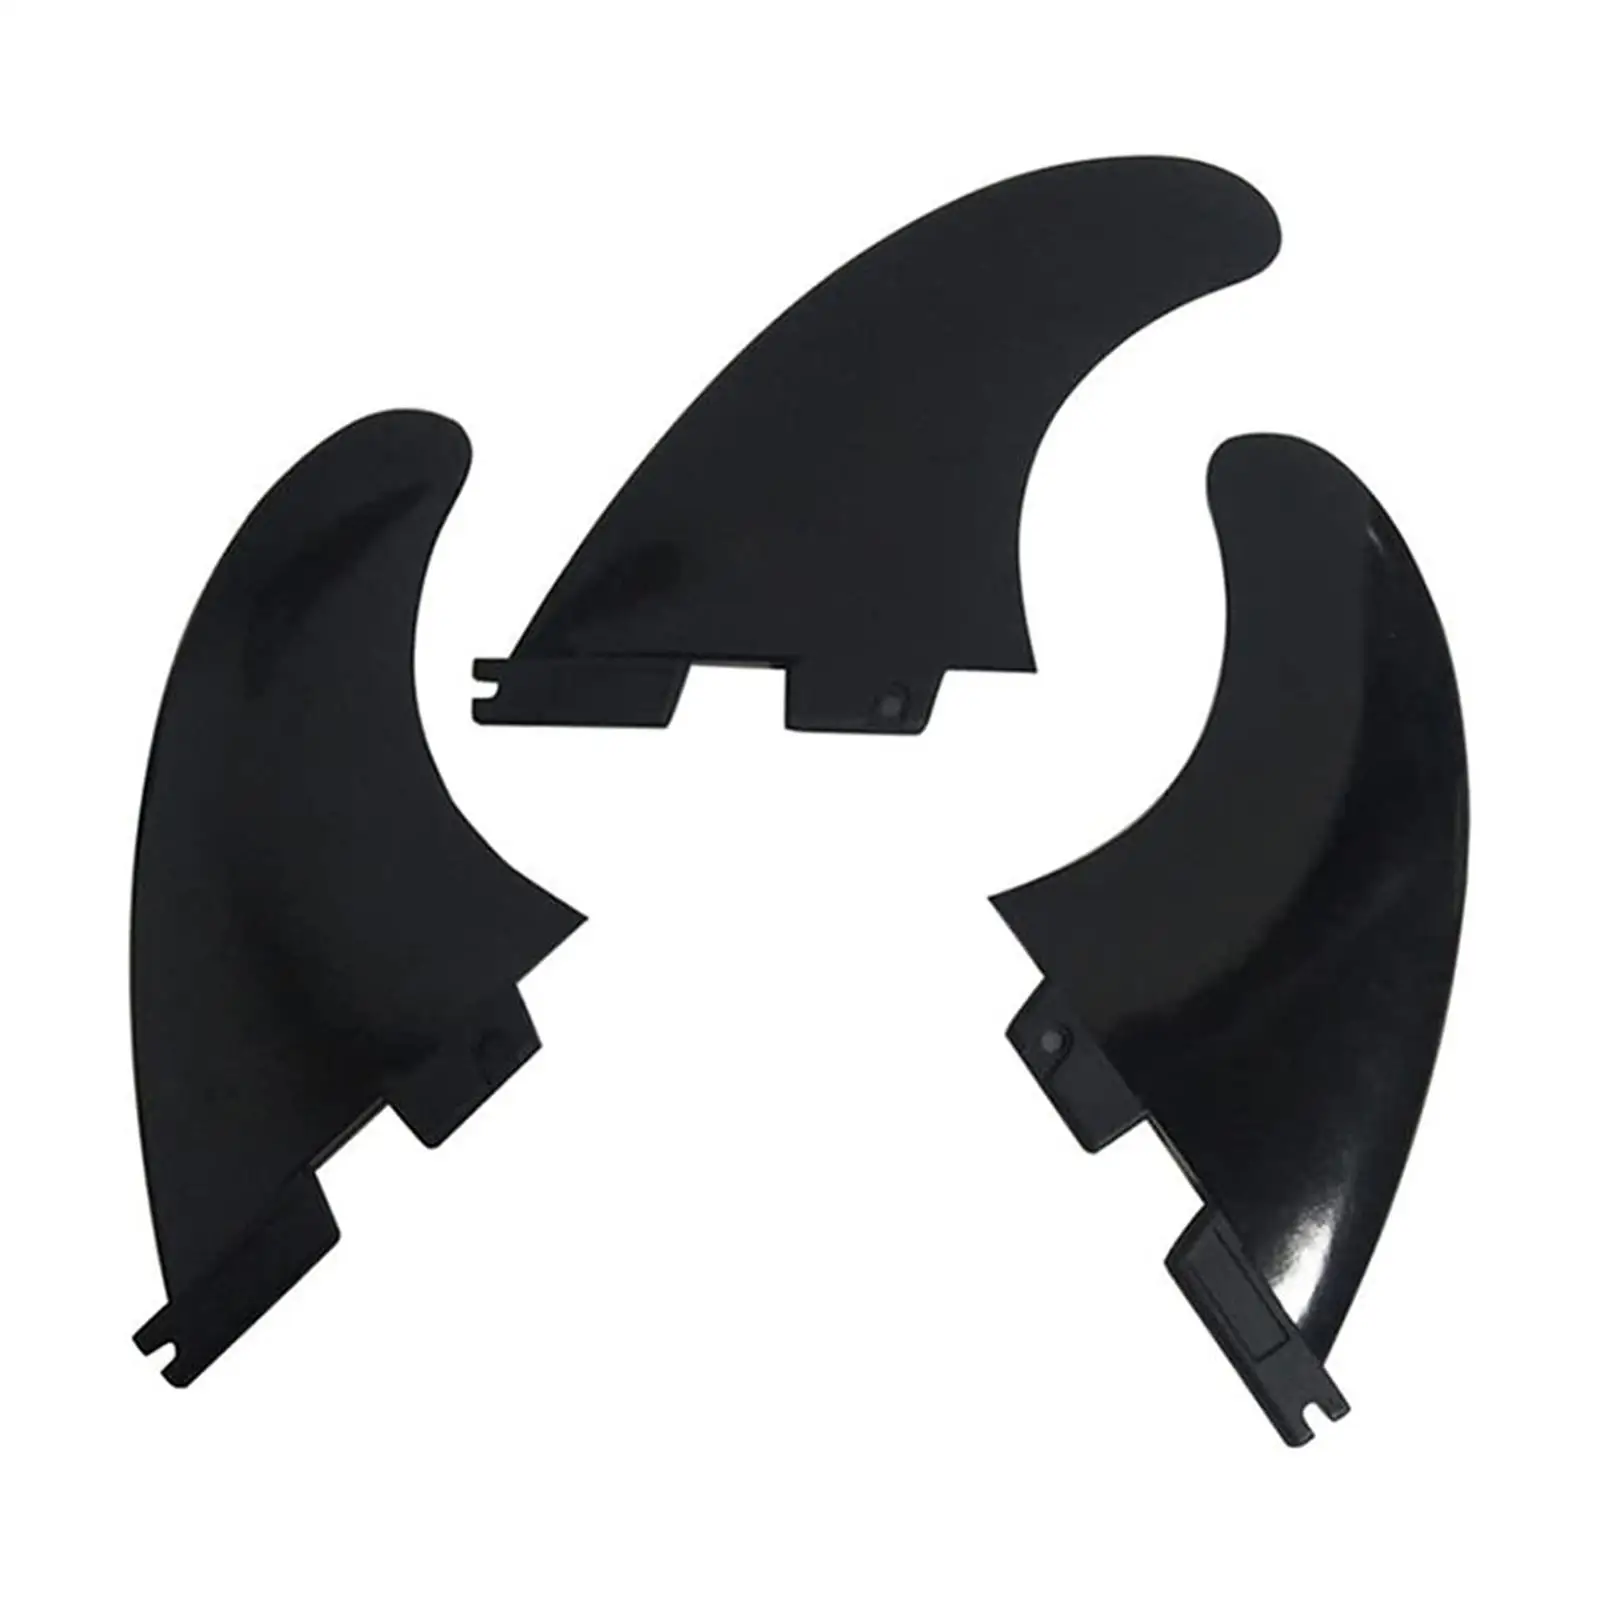 3x Surfboard Fins Surf Fin Paddleboard Fin for Water Sports Paddleboard Boat